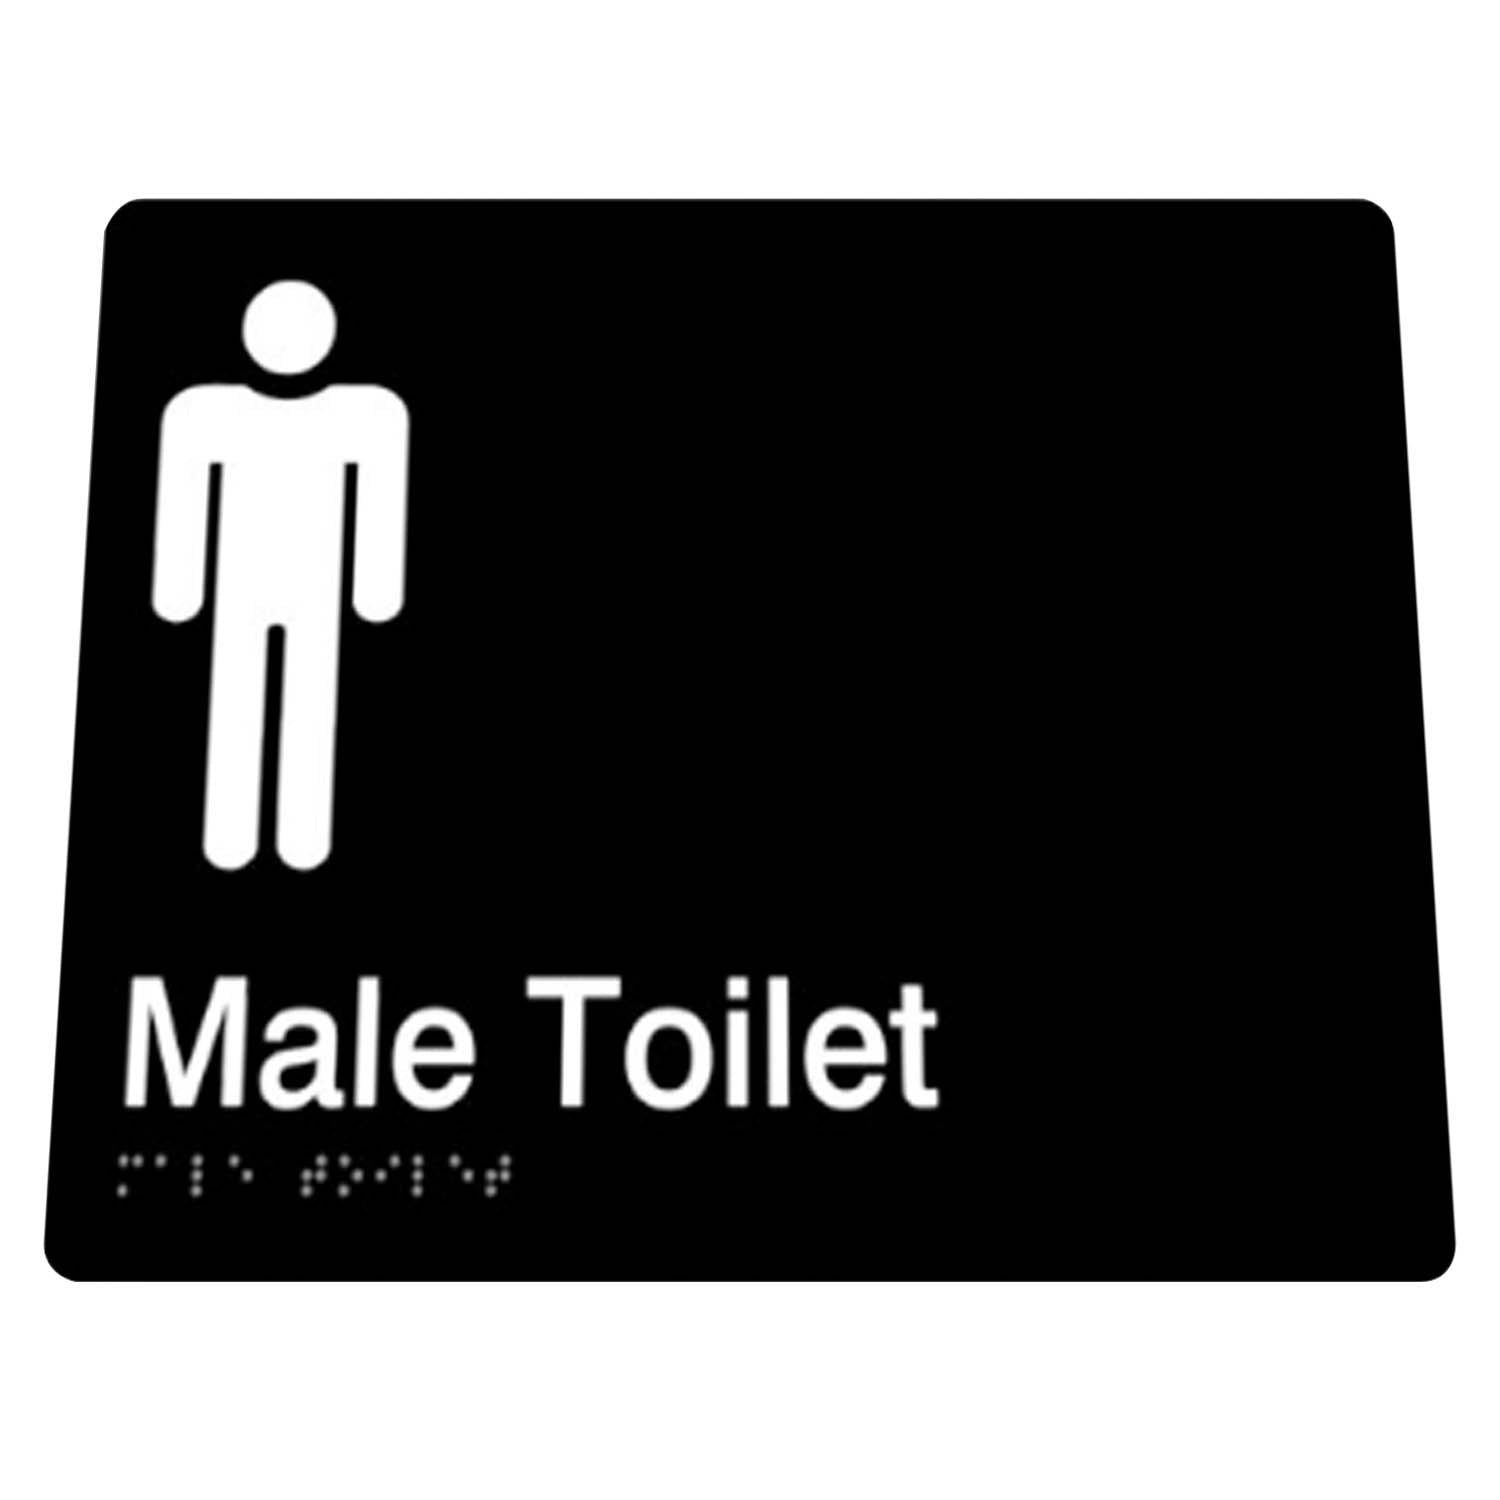 Male Toilet Braille Sign Black